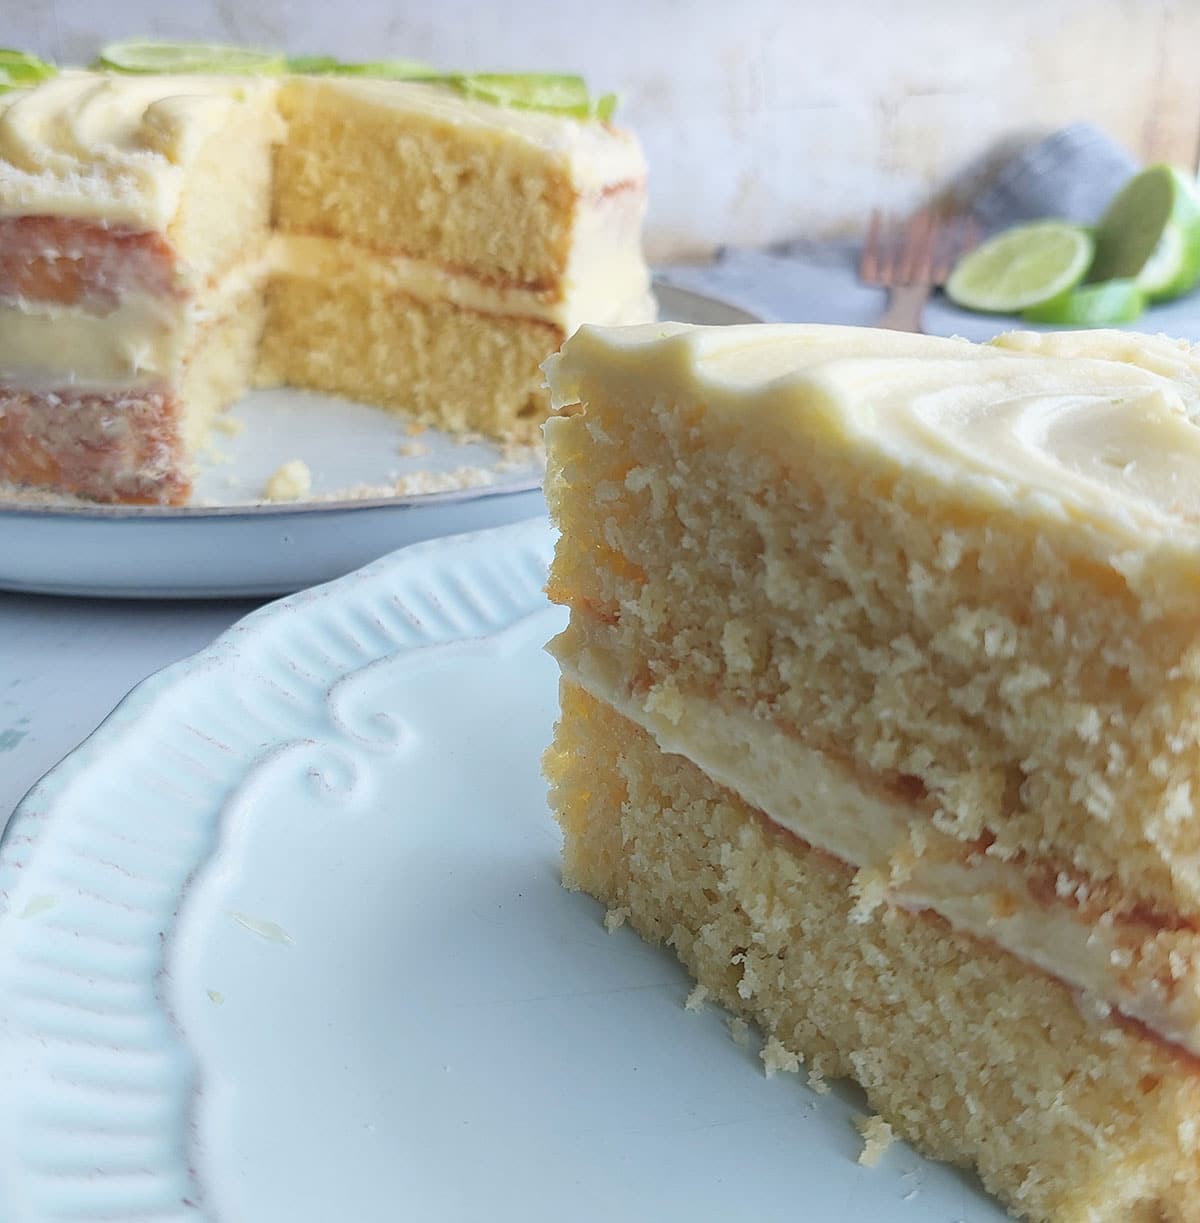 And the frosting, It's so thick and creamy, with a zesty taste that adds a special twist to the classic buttercream frosting. The best part is, it's super easy to work with, so it's perfect for filling and topping this cake.